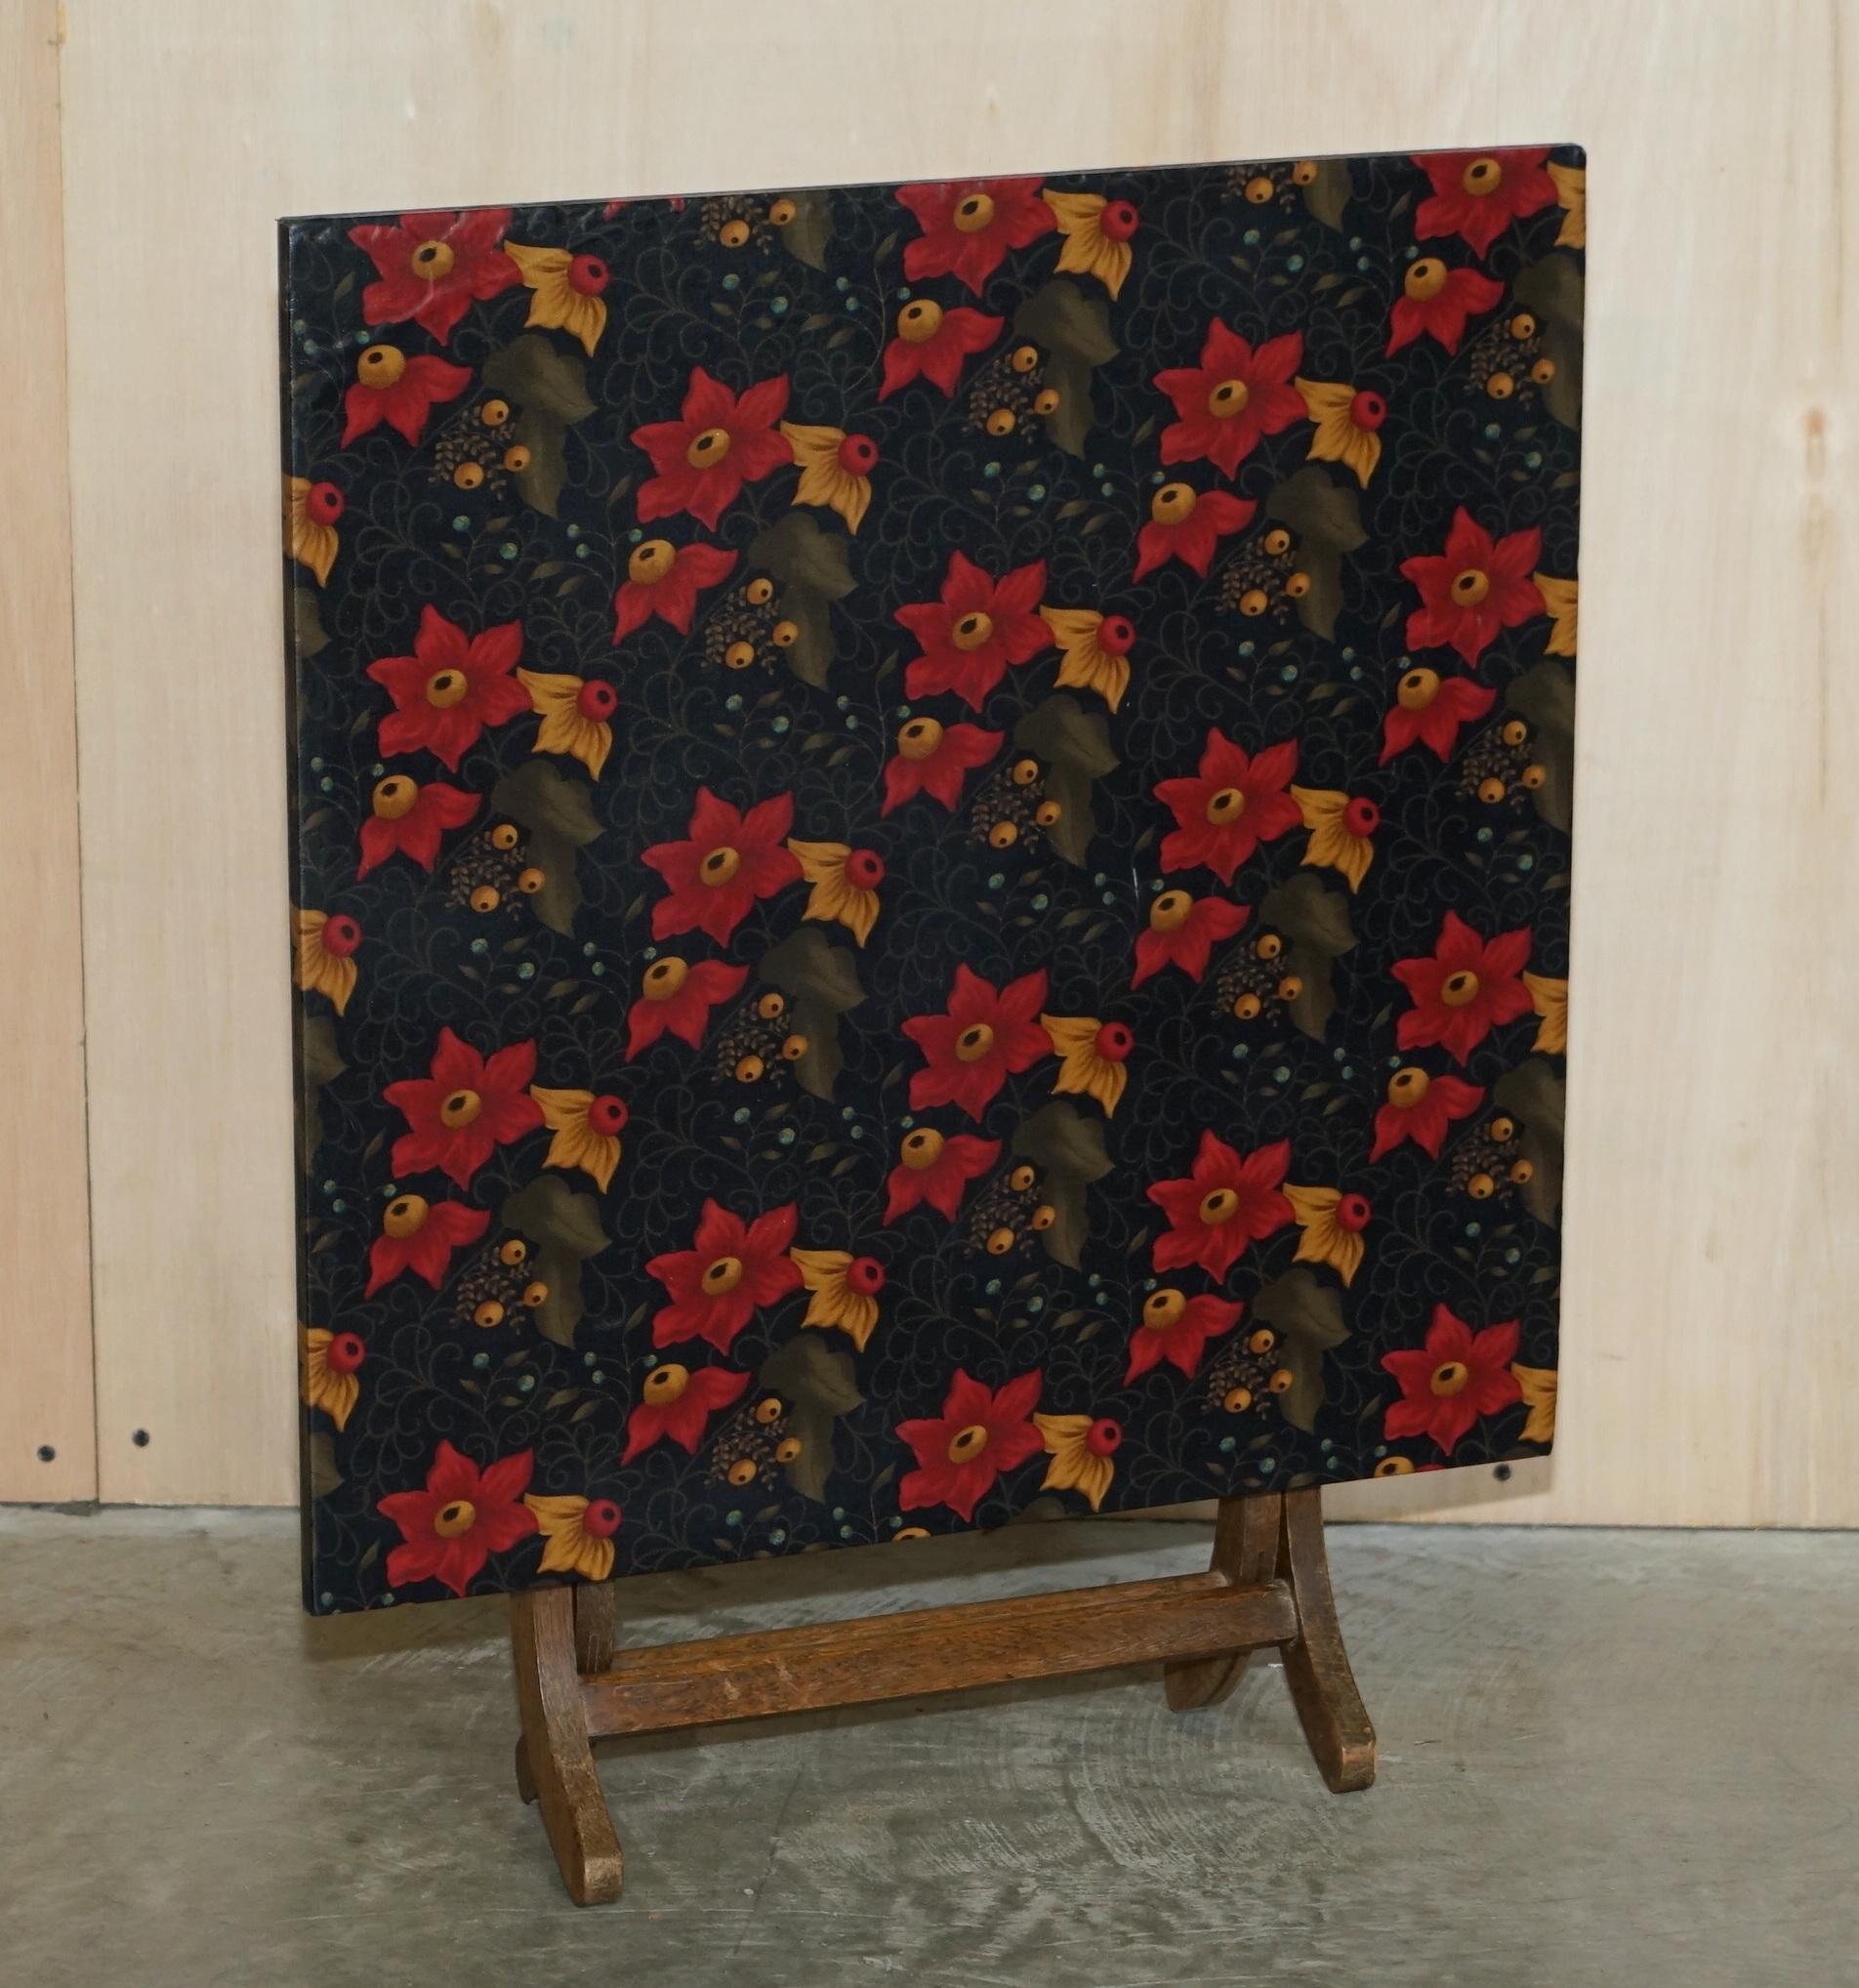 We are delighted to offer for sale this pair of lovely Mid Century Modern pine folding tables with floral covered tops 

A good looking, well made and decorative pair of folding side tables, in pine with nicely covered floral tops

These are